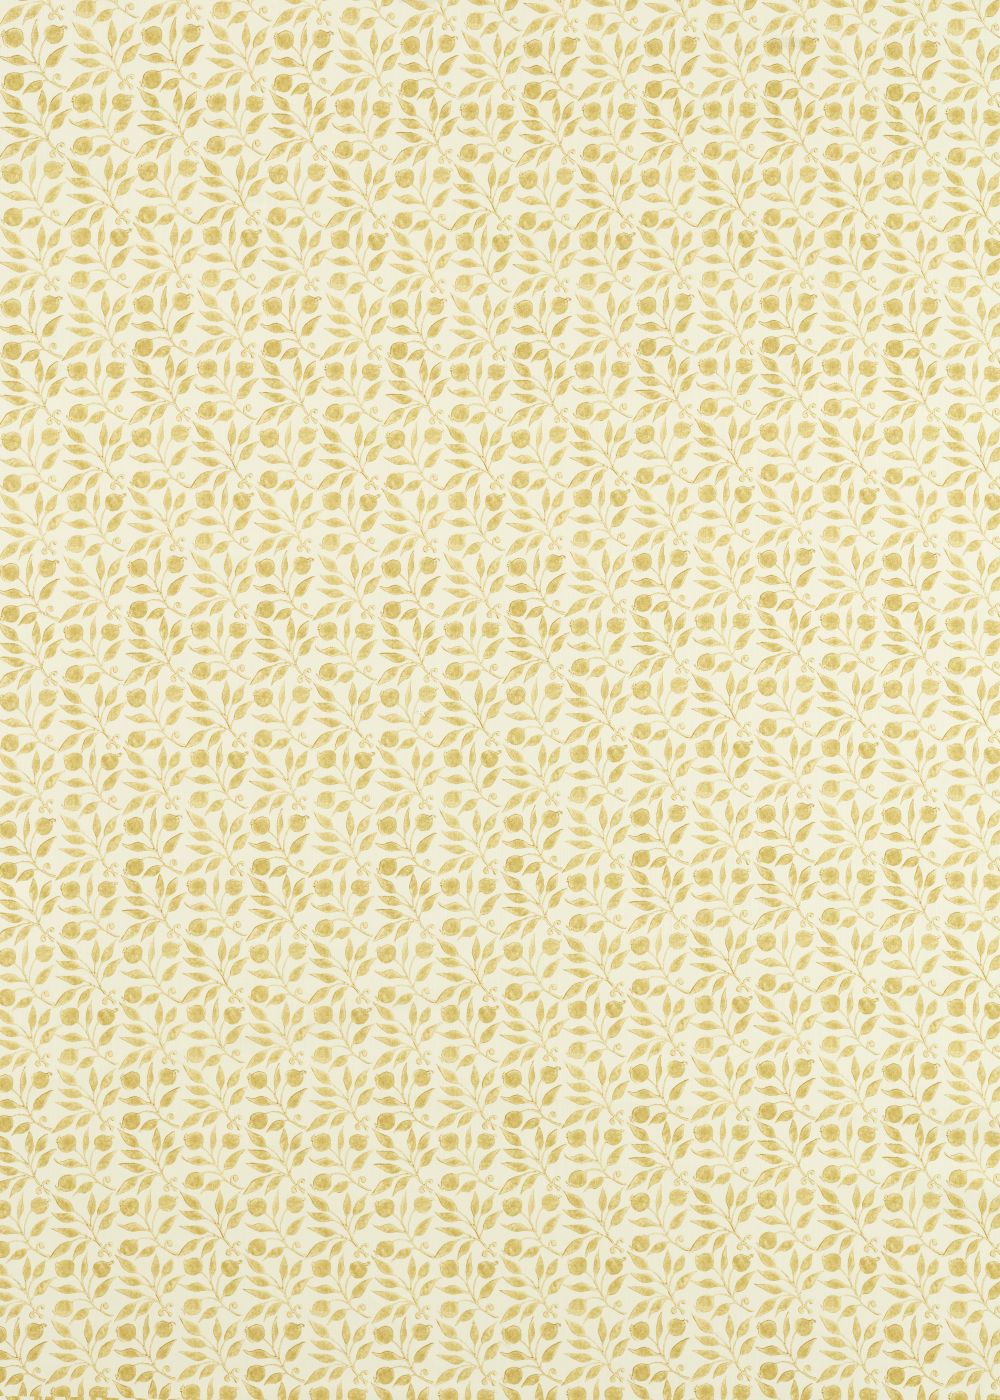 Rosehip Fabric - Wheat - by Morris